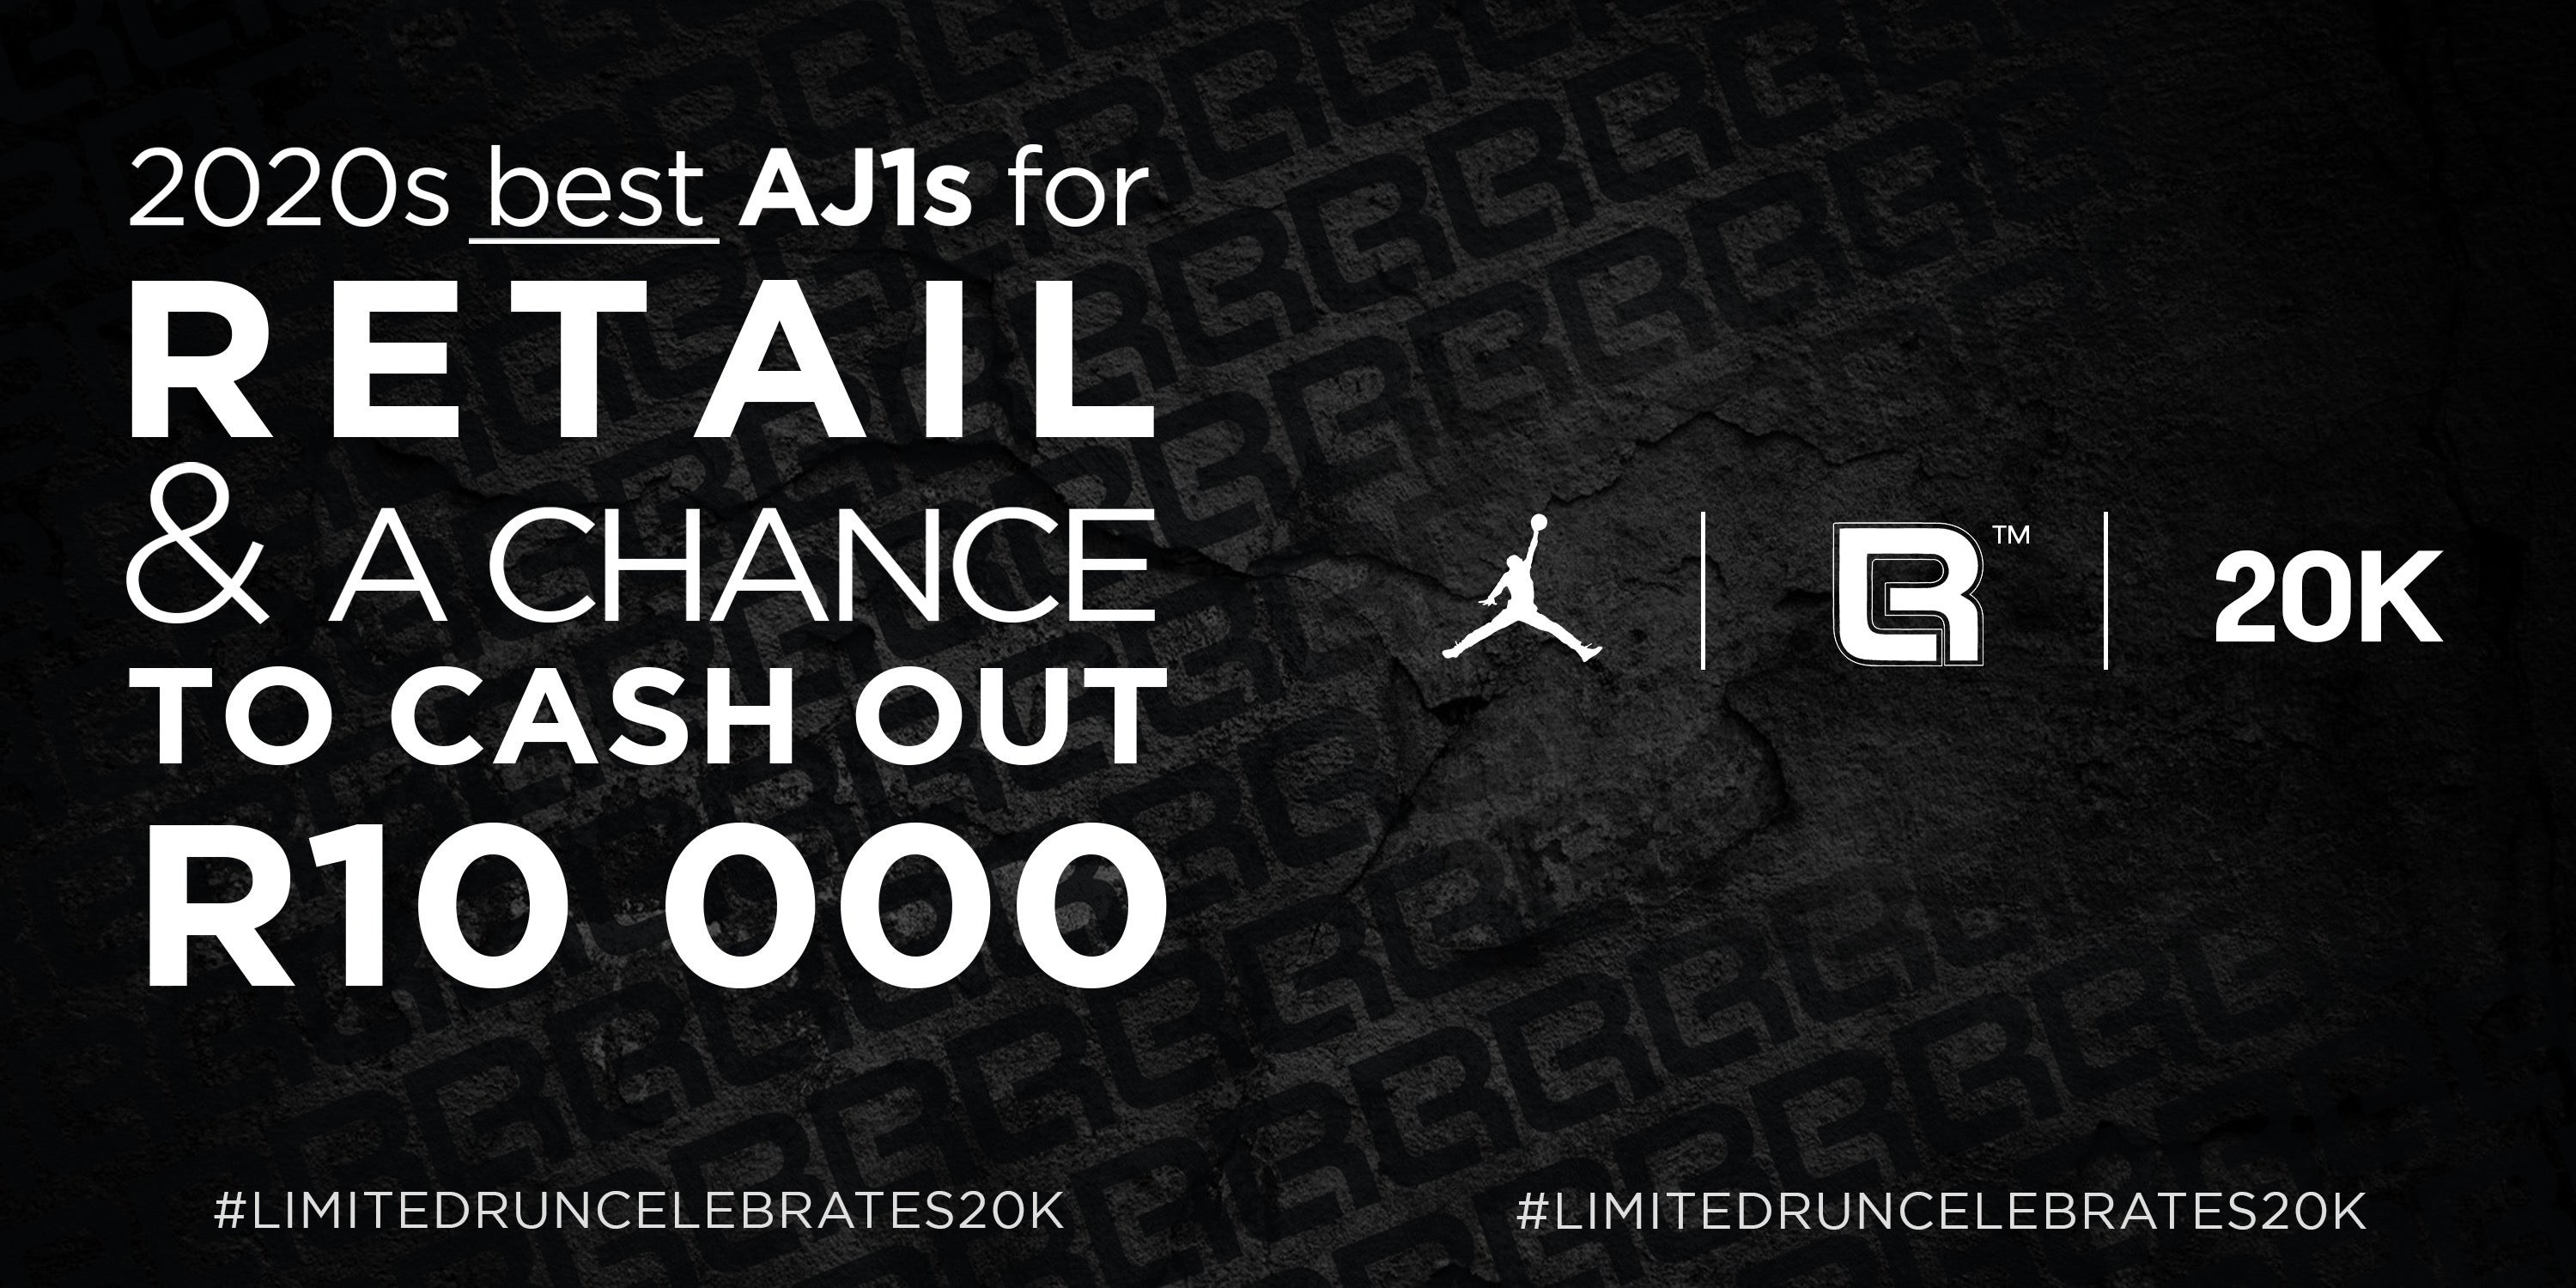 LIMITED RUN  celebrates 20k with 2020’s best AJ1s for retail and a chance to cash out R10 000!